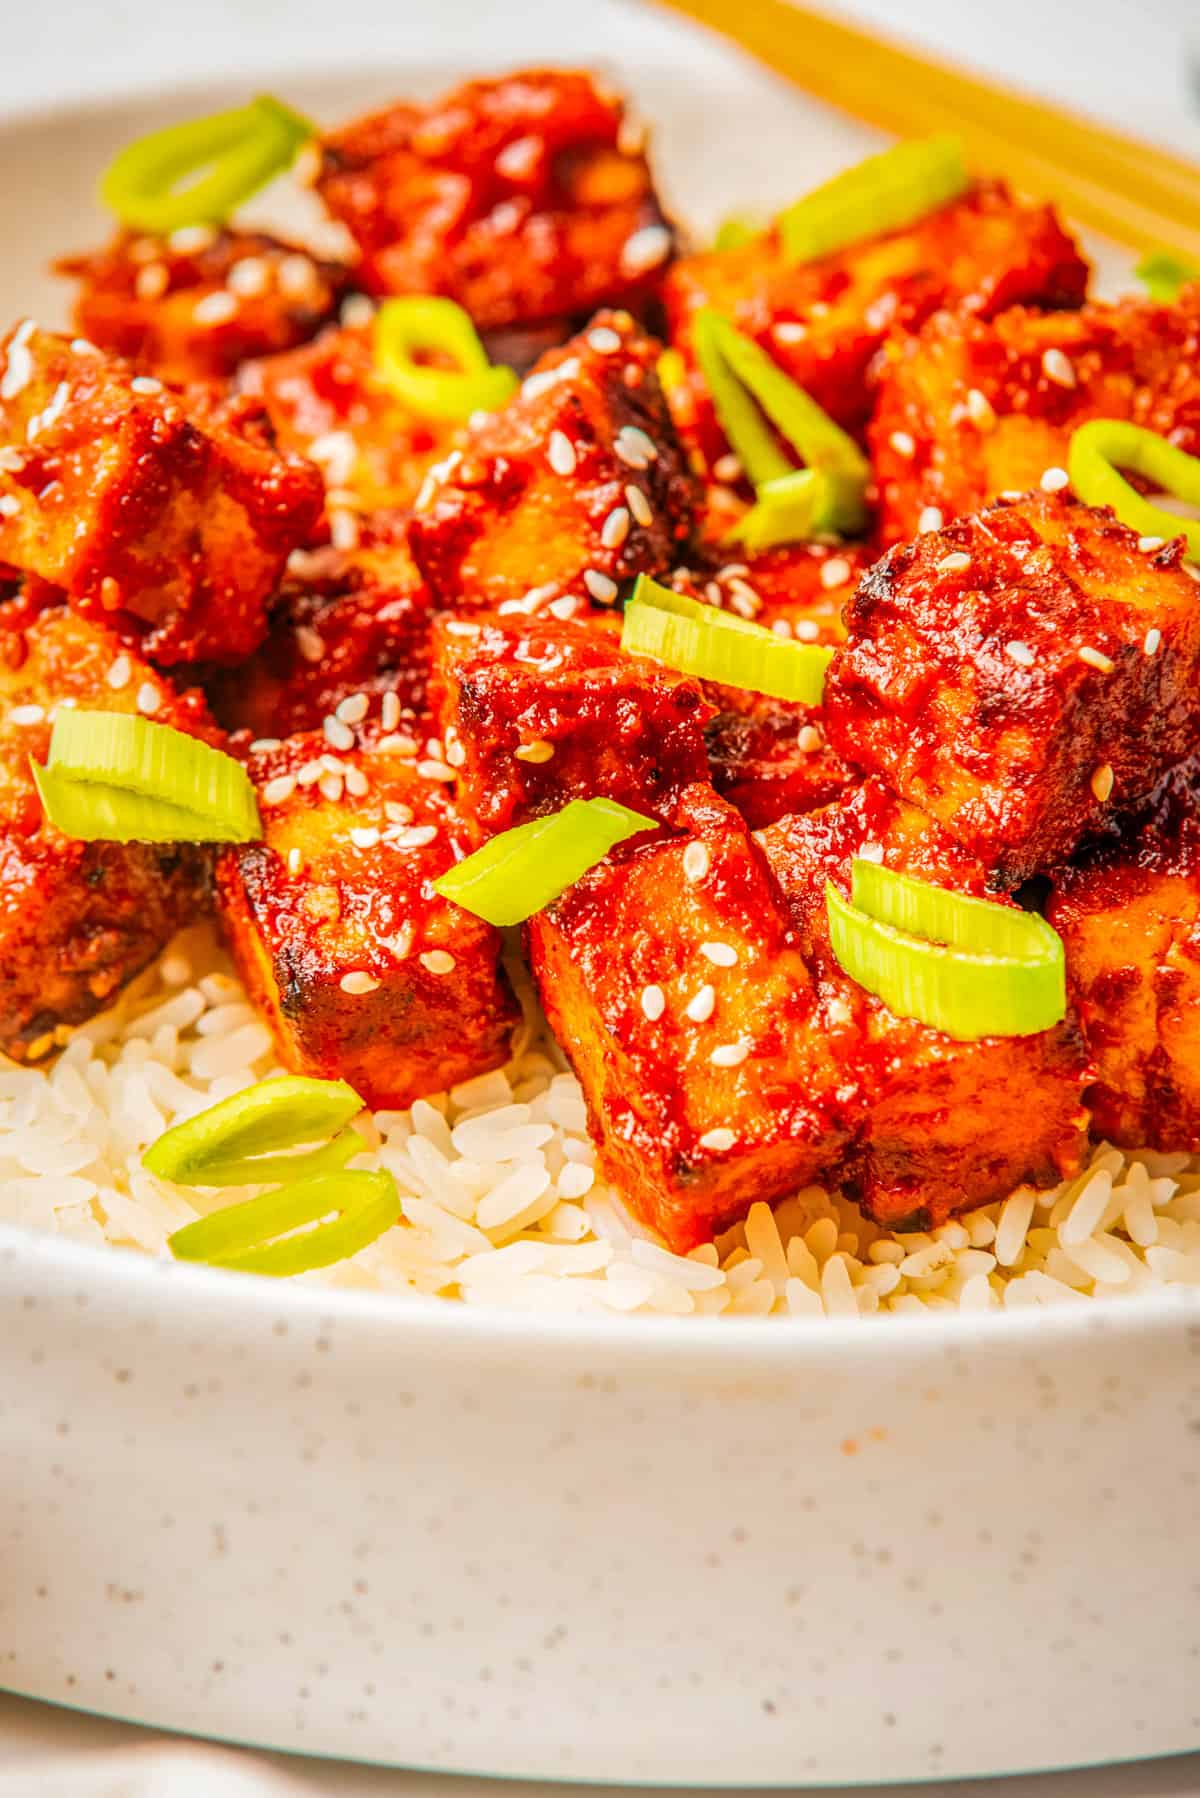 A close up image of gochujang tofu with sesame seeds and green onions, on top of a bowl of rice.